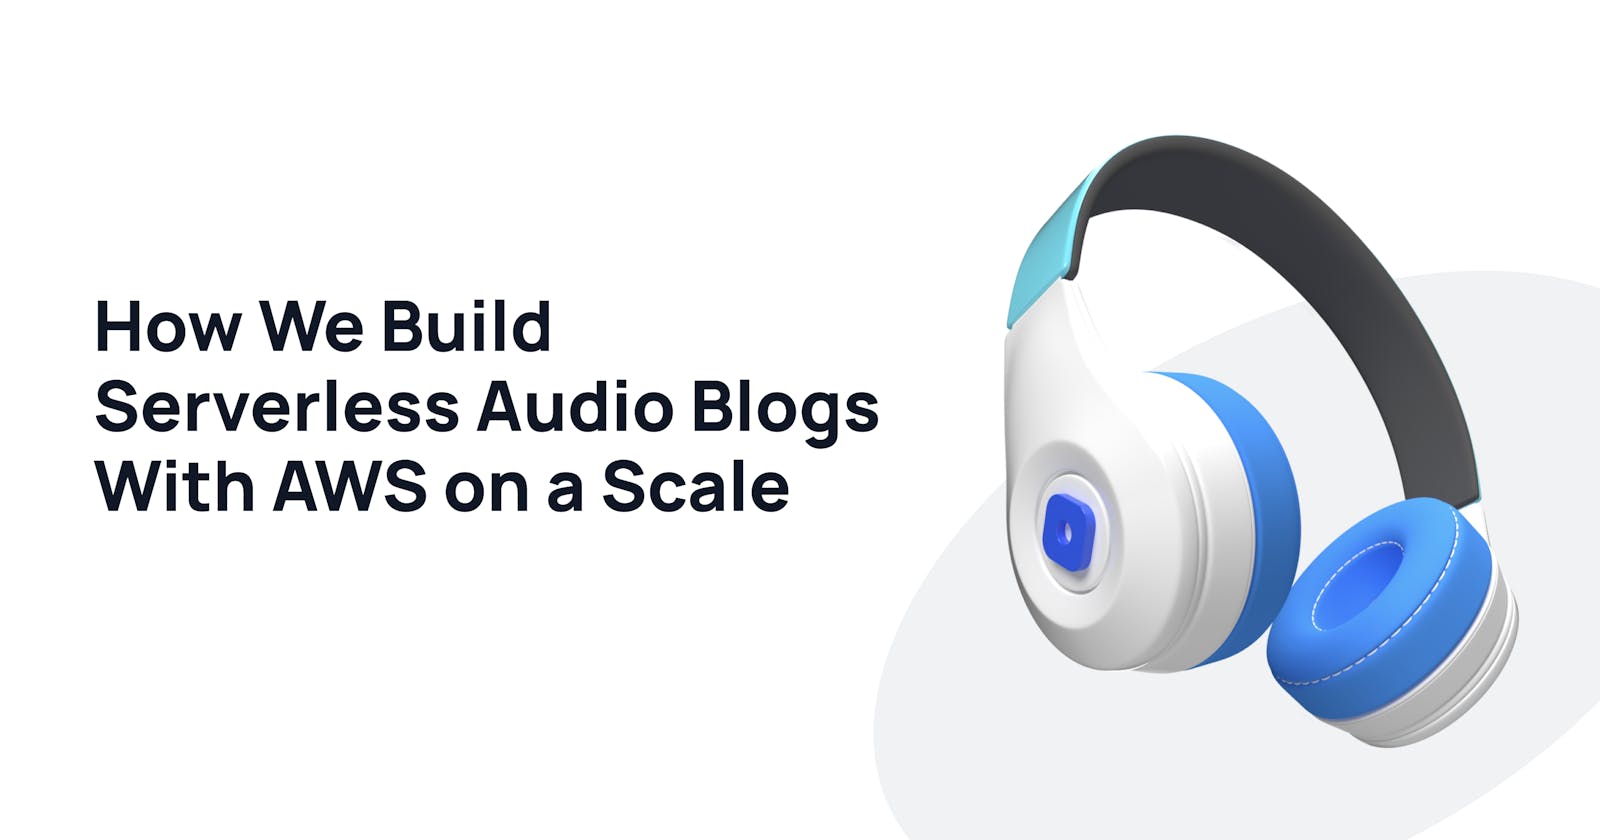 How We Build Serverless Audio Blogs with AWS on a Scale